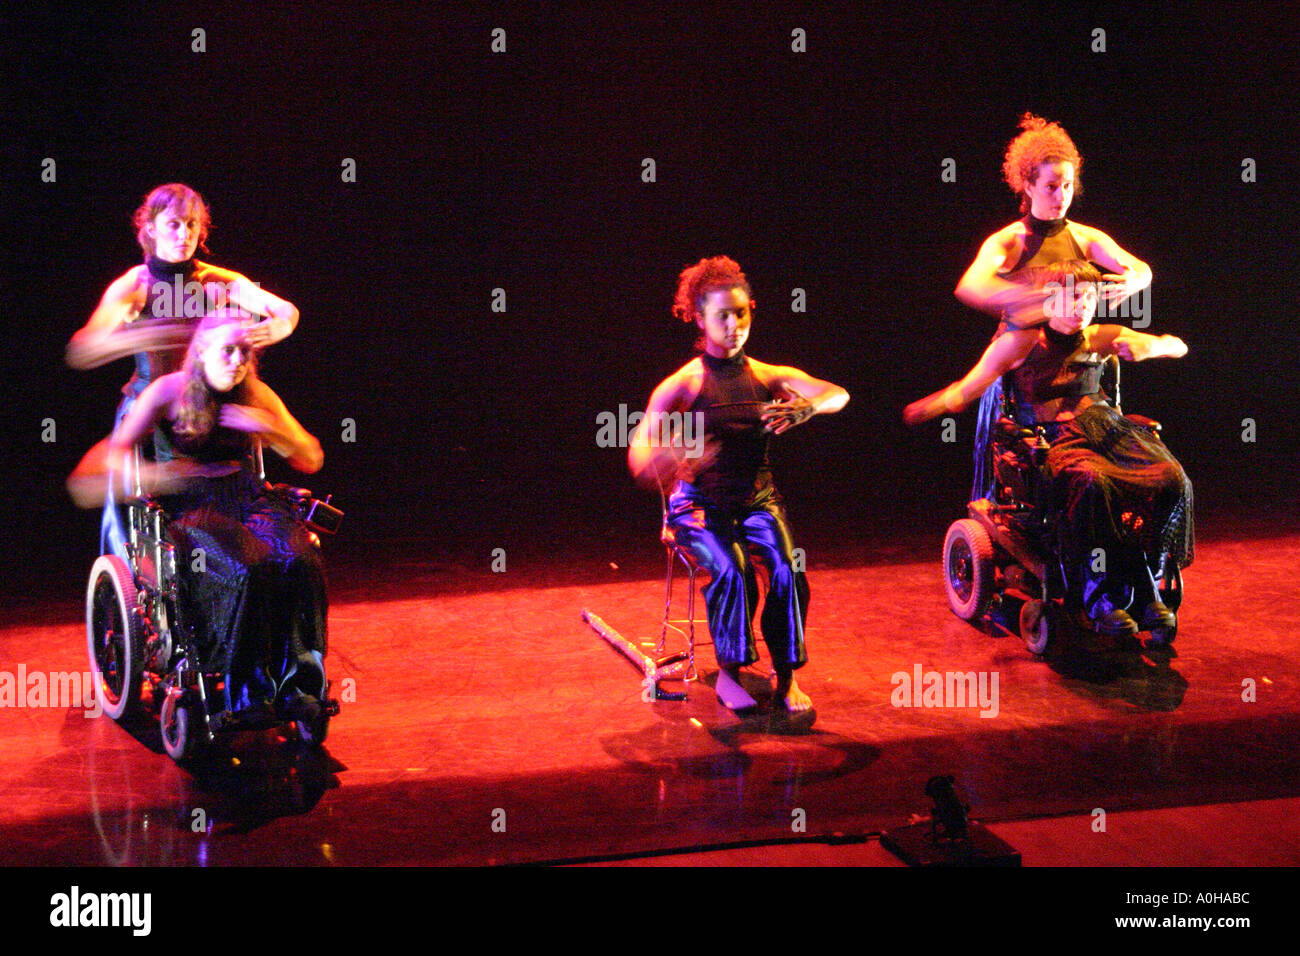 Miami Florida,New World School of the Arts Dance Theatre,theater,AXIS Dance Company,includes disabled dancer,dancing,entertainment,U.S.A.,United State Stock Photo